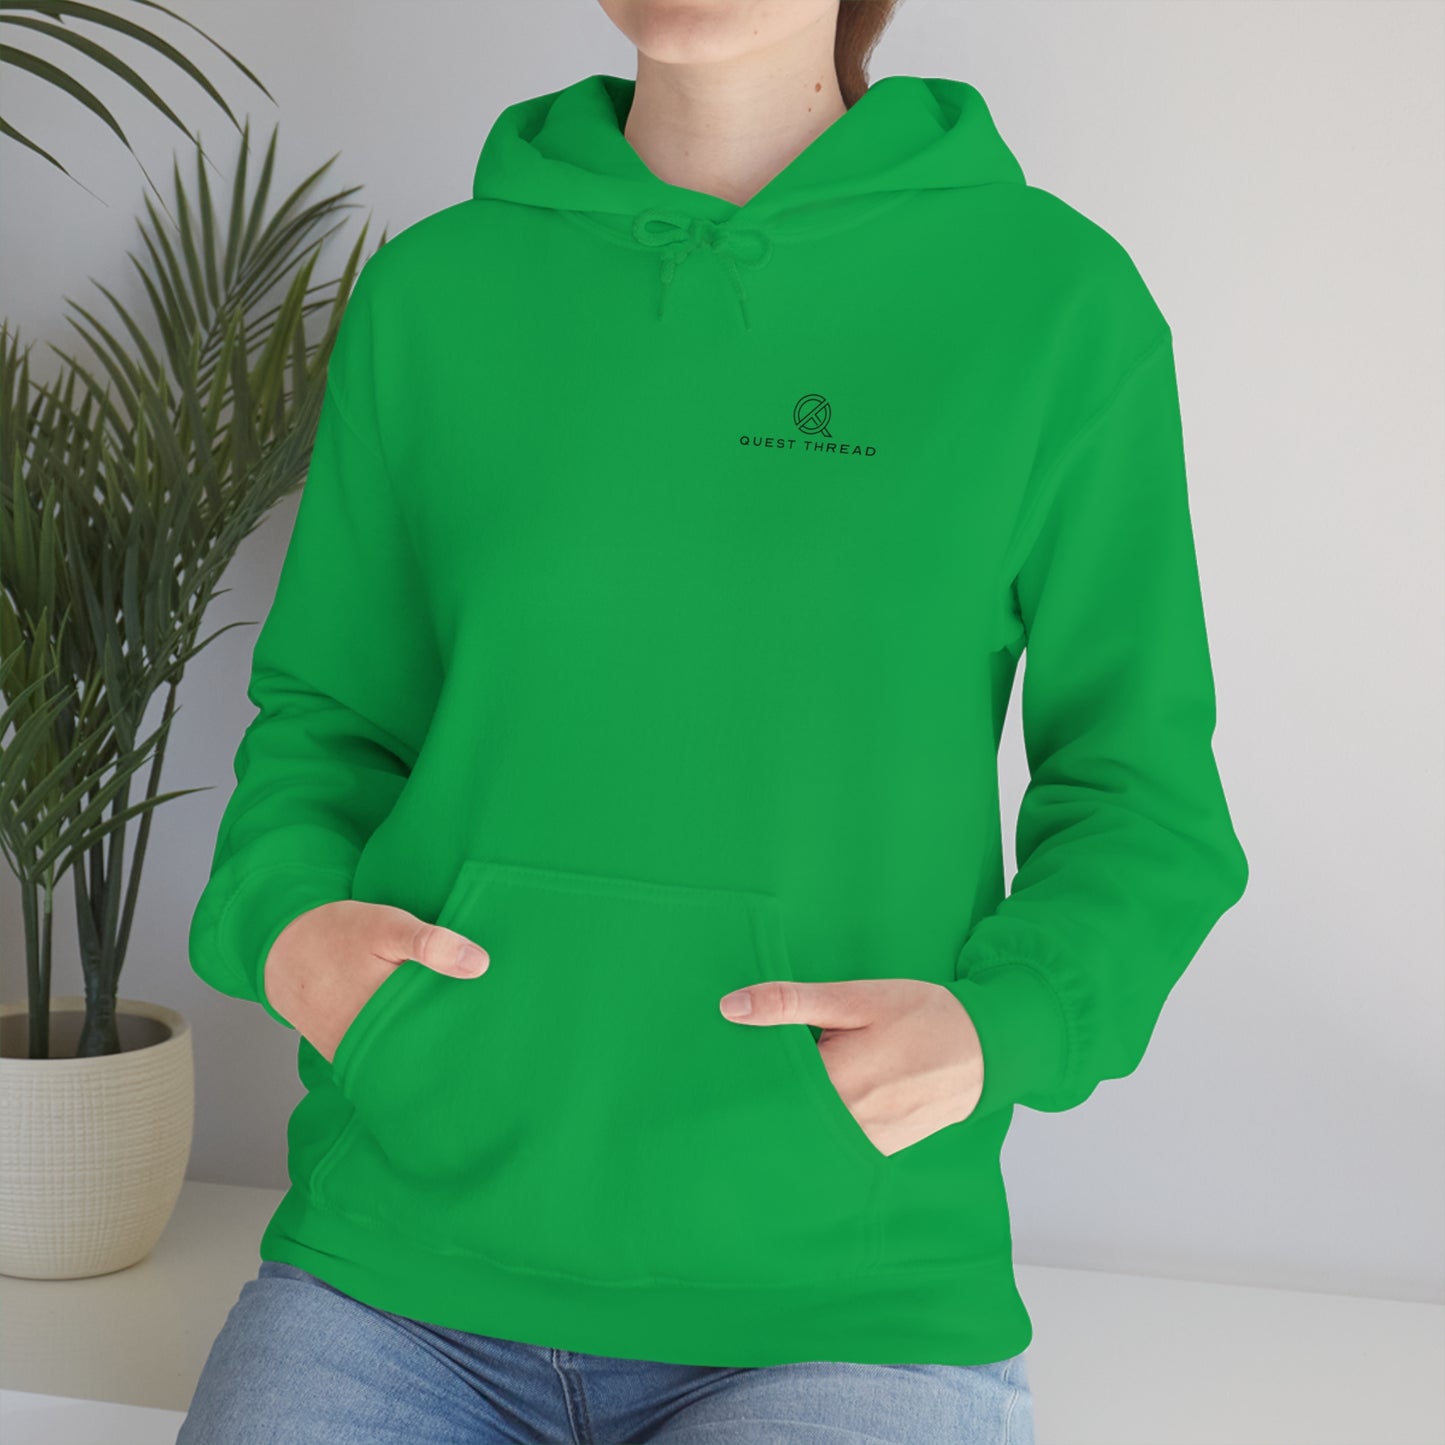 irish-green-quest-thread-hoodie-with-small-logo-on-left-chest